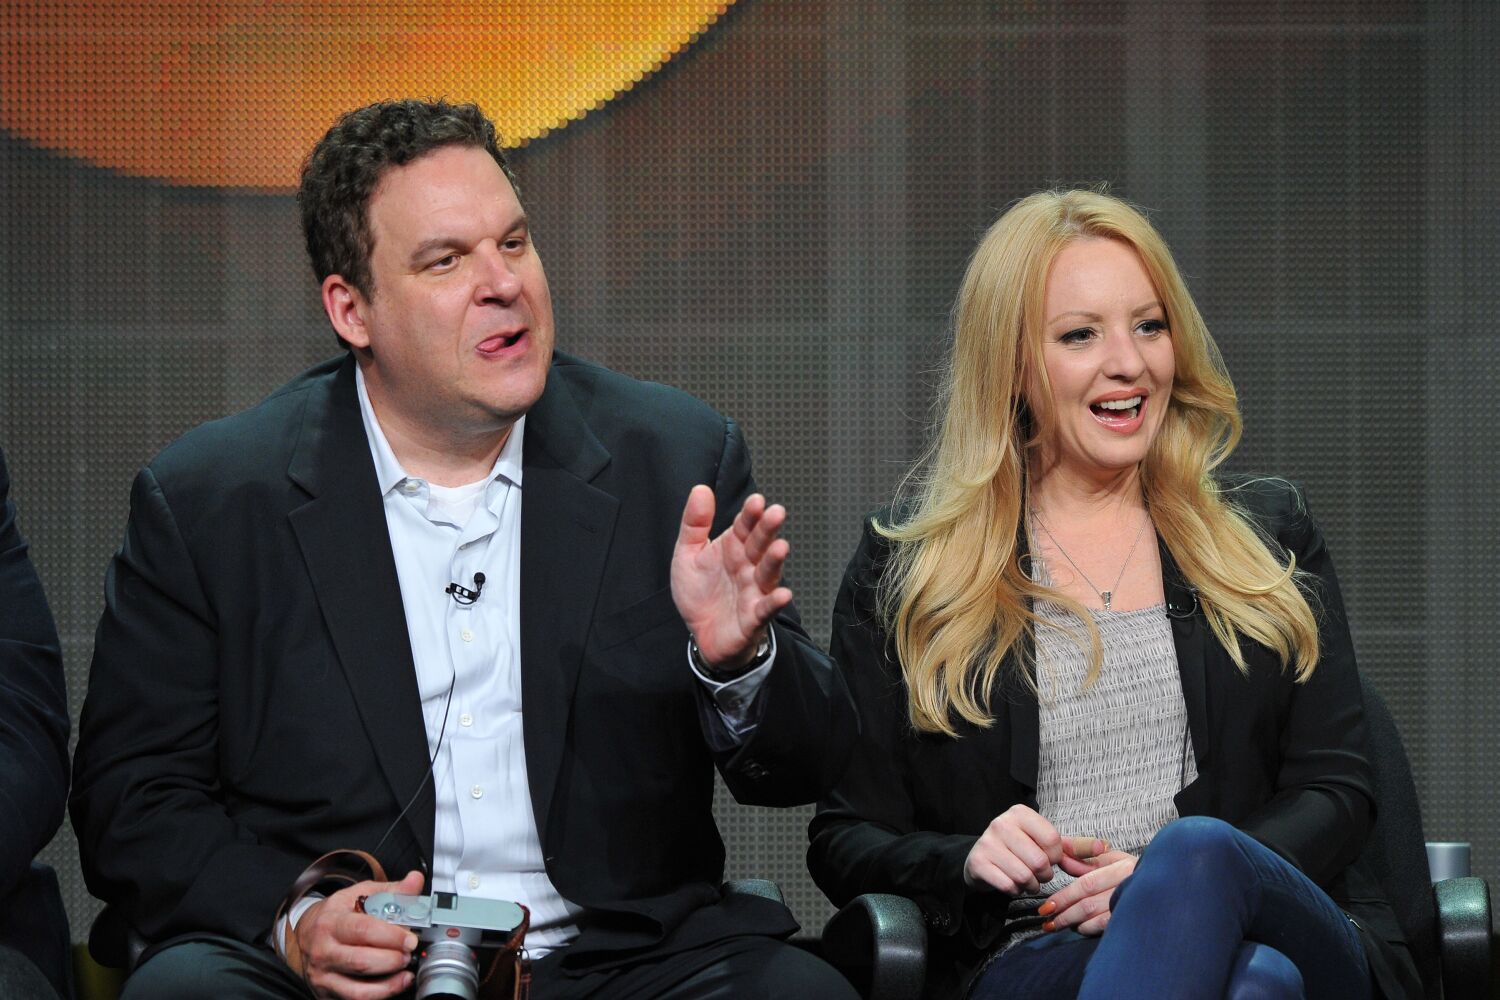 Wendi McLendon-Covey says Jeff Garlin's 'Goldbergs' exit 'was a long time coming'